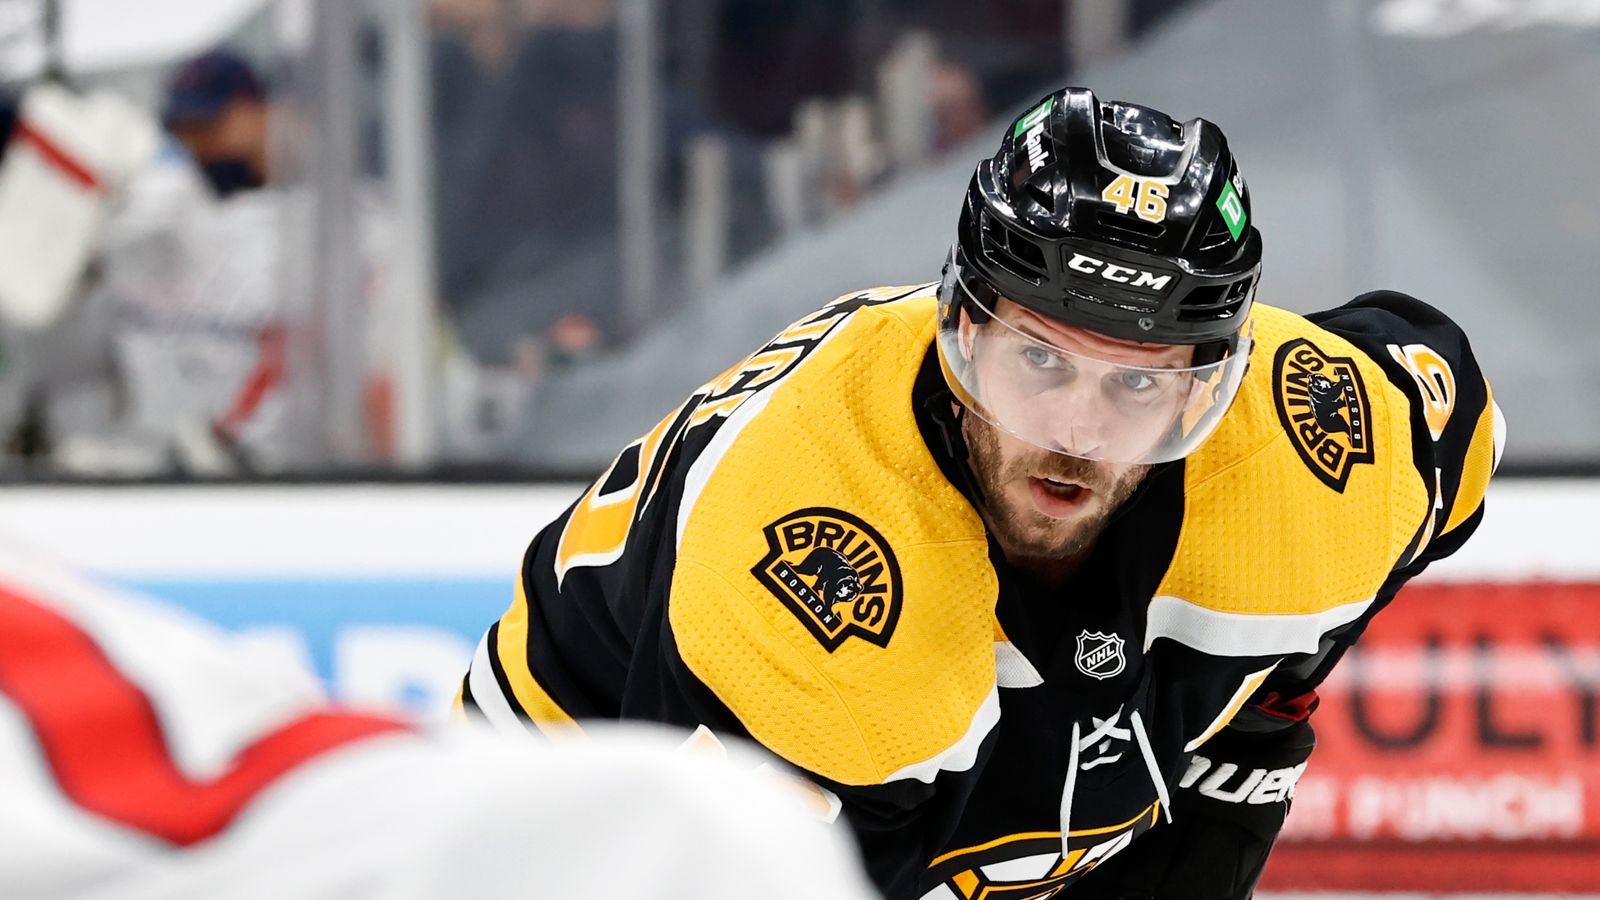 Bergeron retires from NHL after 19 seasons with Bruins